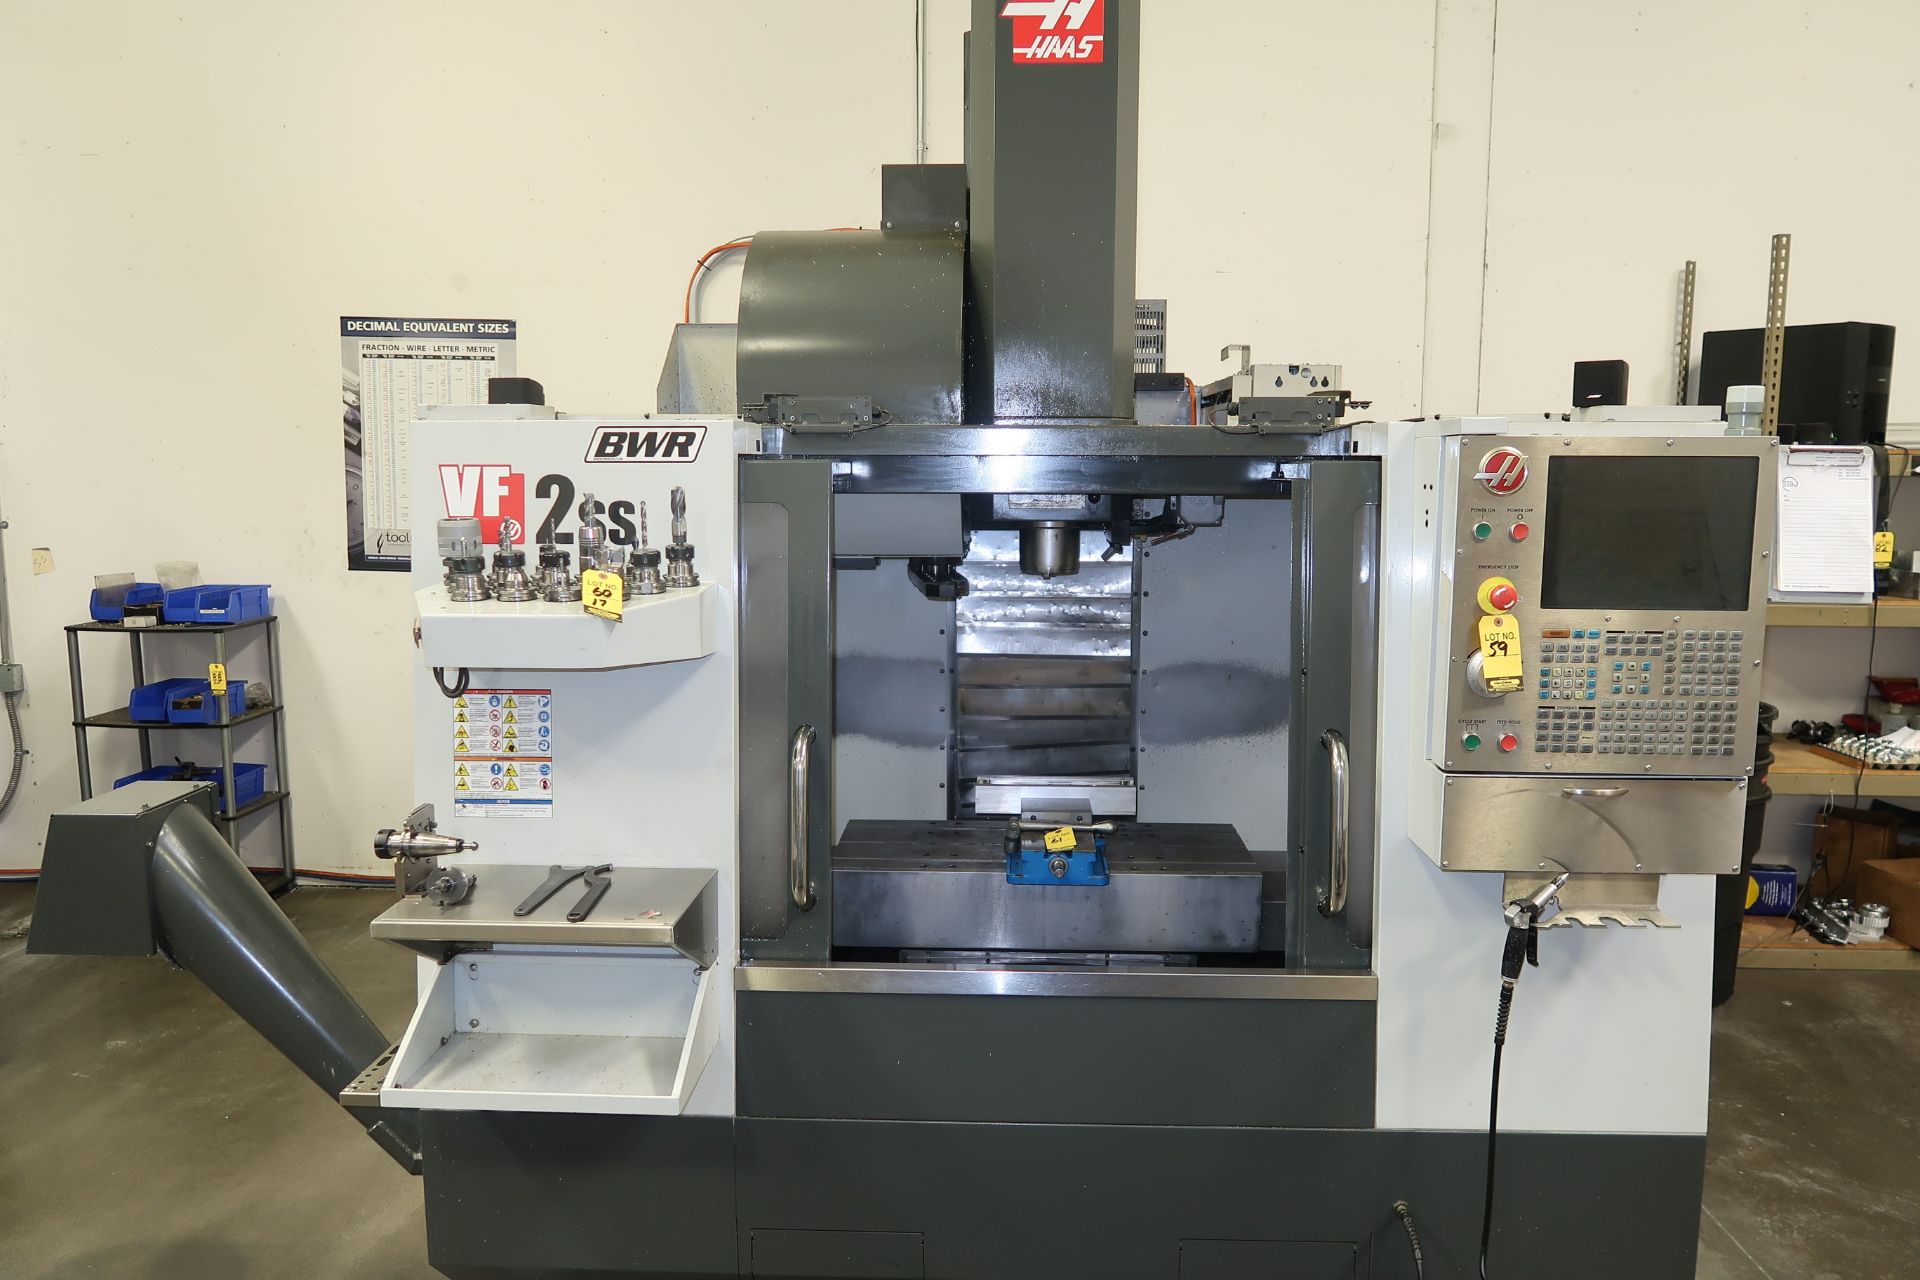 2012 HAAS VF-2SS CNC VERTICAL MACHINING CENTER, CHIP AUGER, PROGRAMMABLE COOLANT, 24 TOOL ATC, SN.